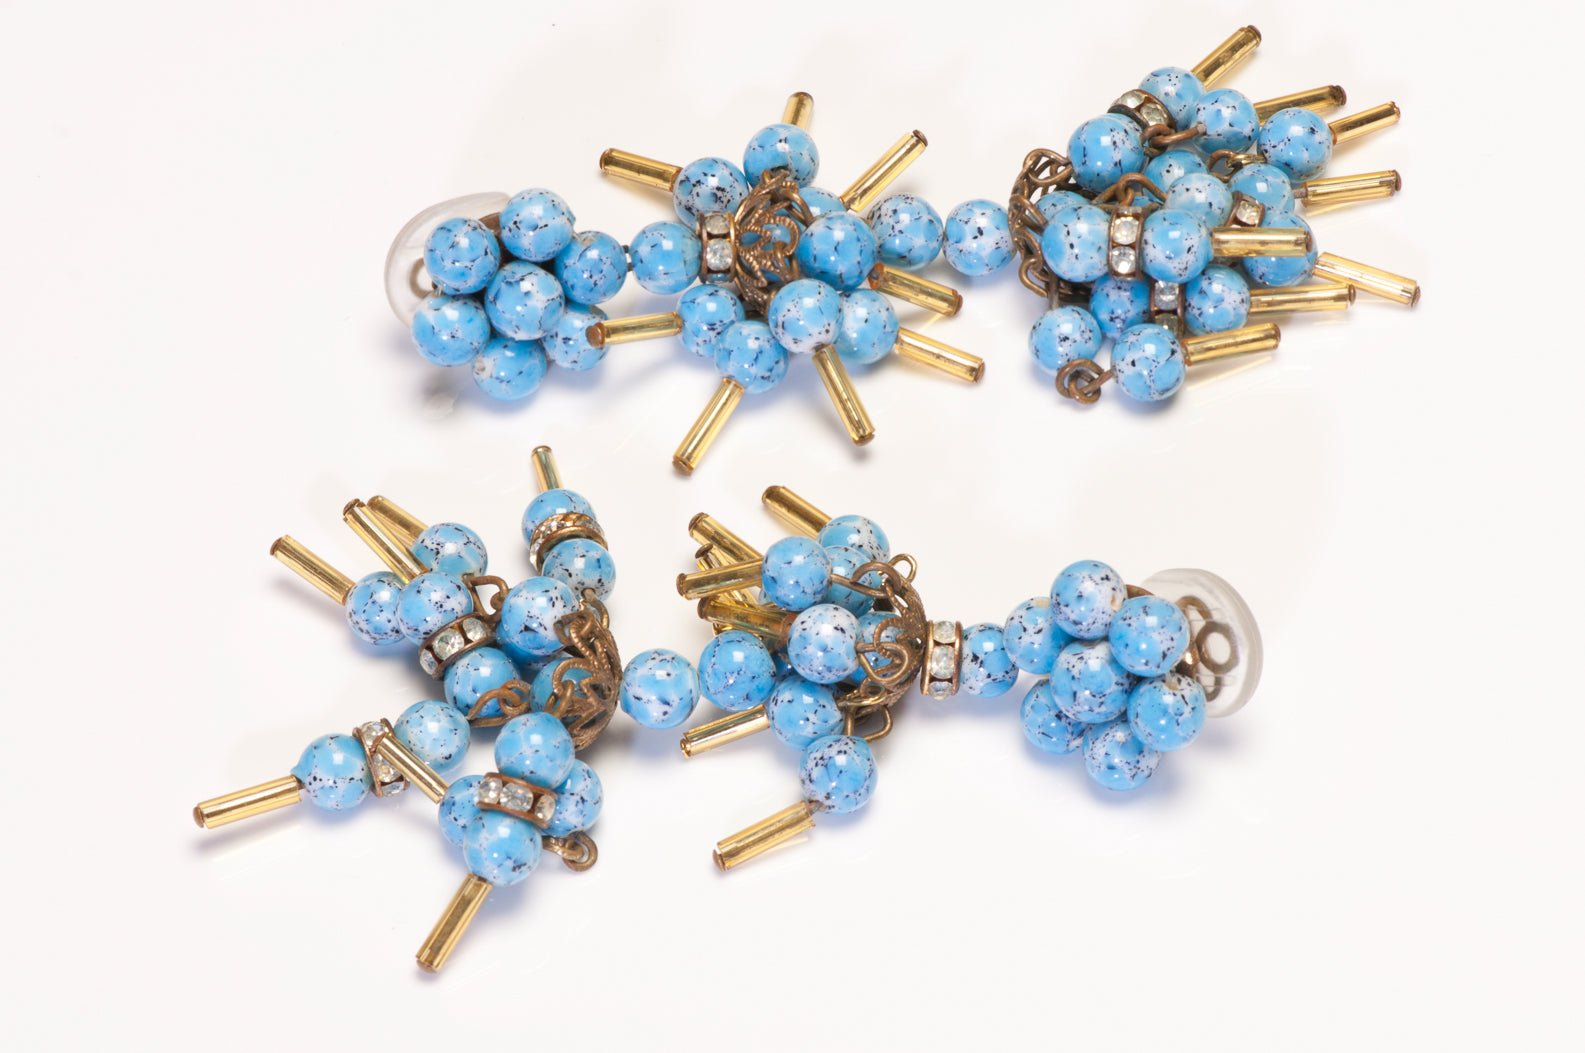 Vintage 1930's French Blue Glass Beads Long Drop Earrings